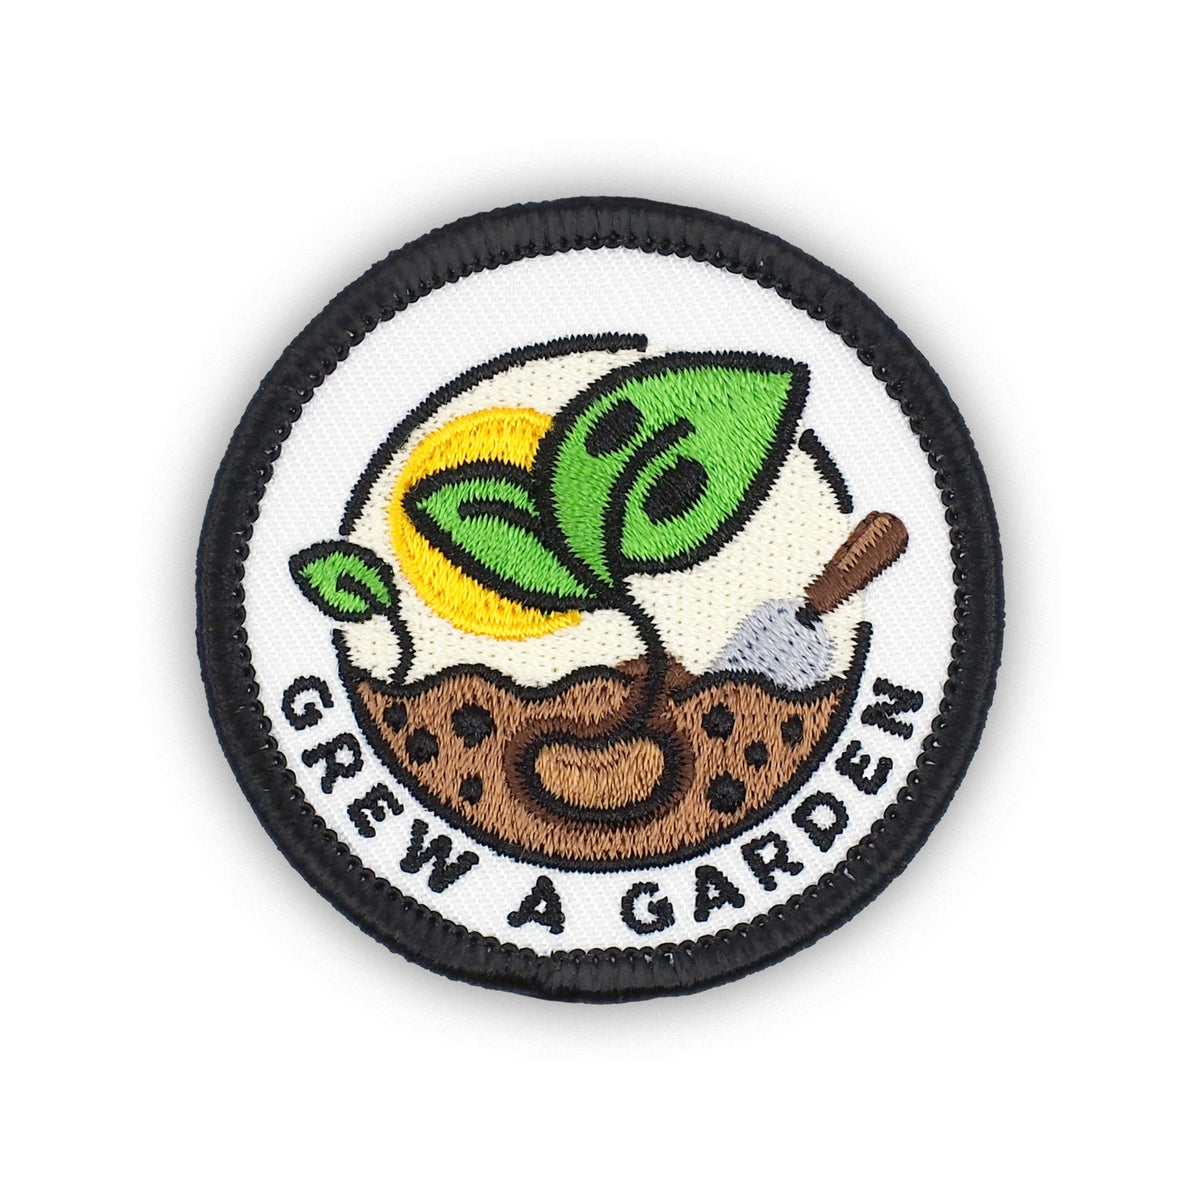 Grew A Garden Seed individual adulting merit badge patch for adults